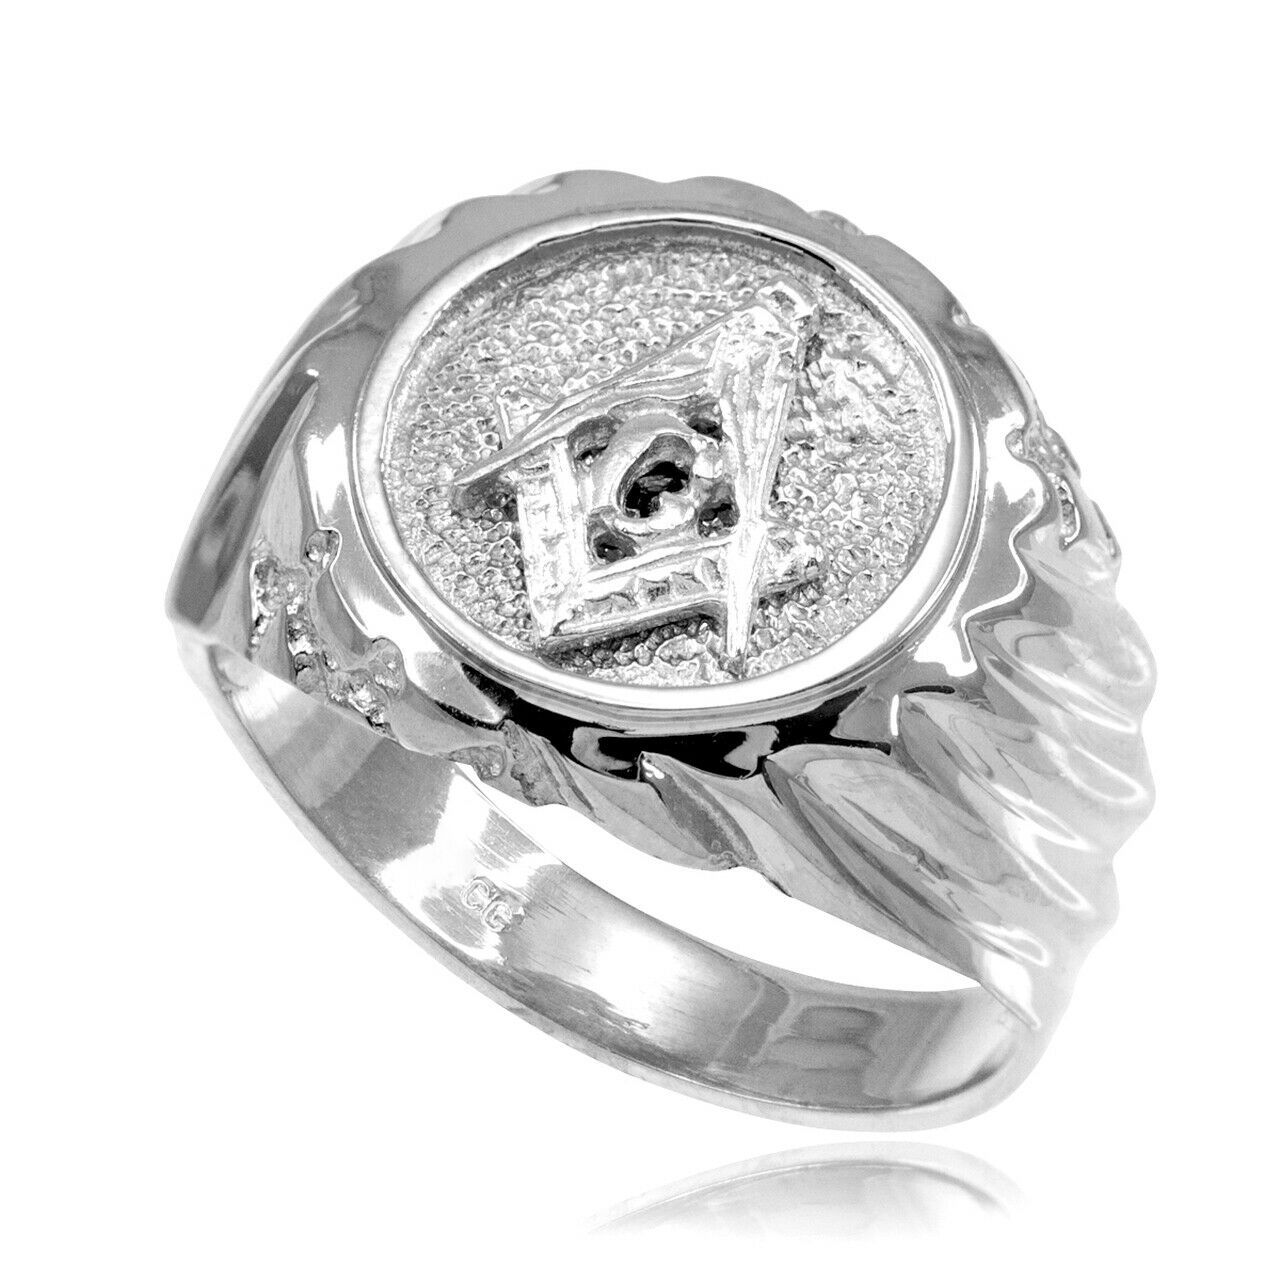 Primary image for 925 Solid Sterling Silver Masonic Men's Ring Any /All Size Made in USA